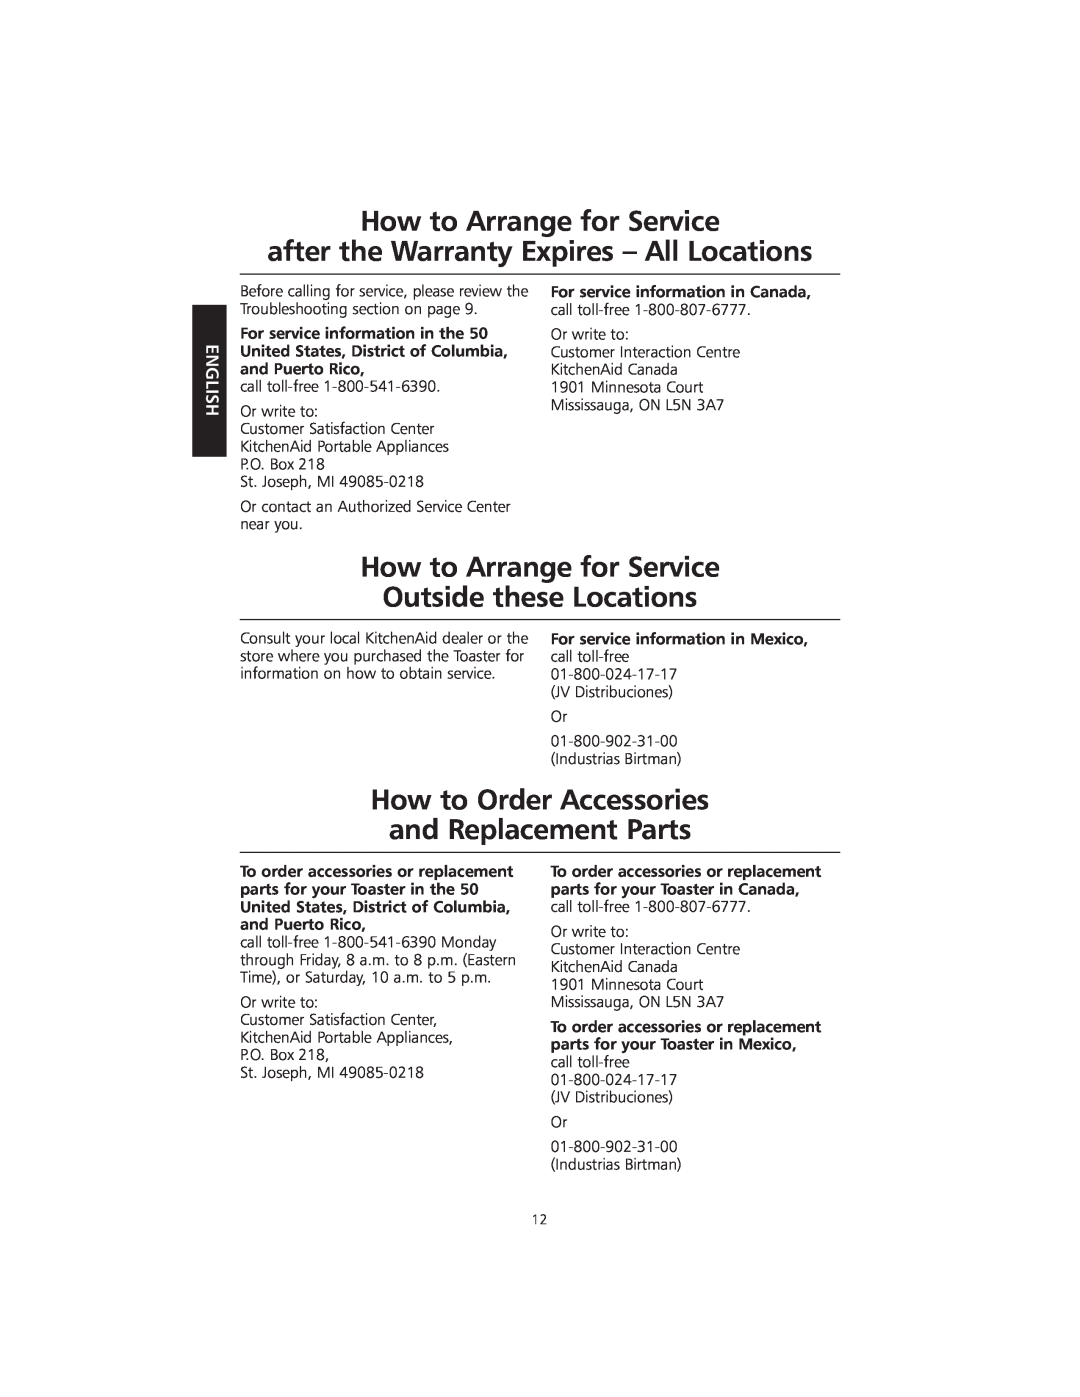 KitchenAid KMTT200 manual How to Arrange for Service after the Warranty Expires - All Locations, English 